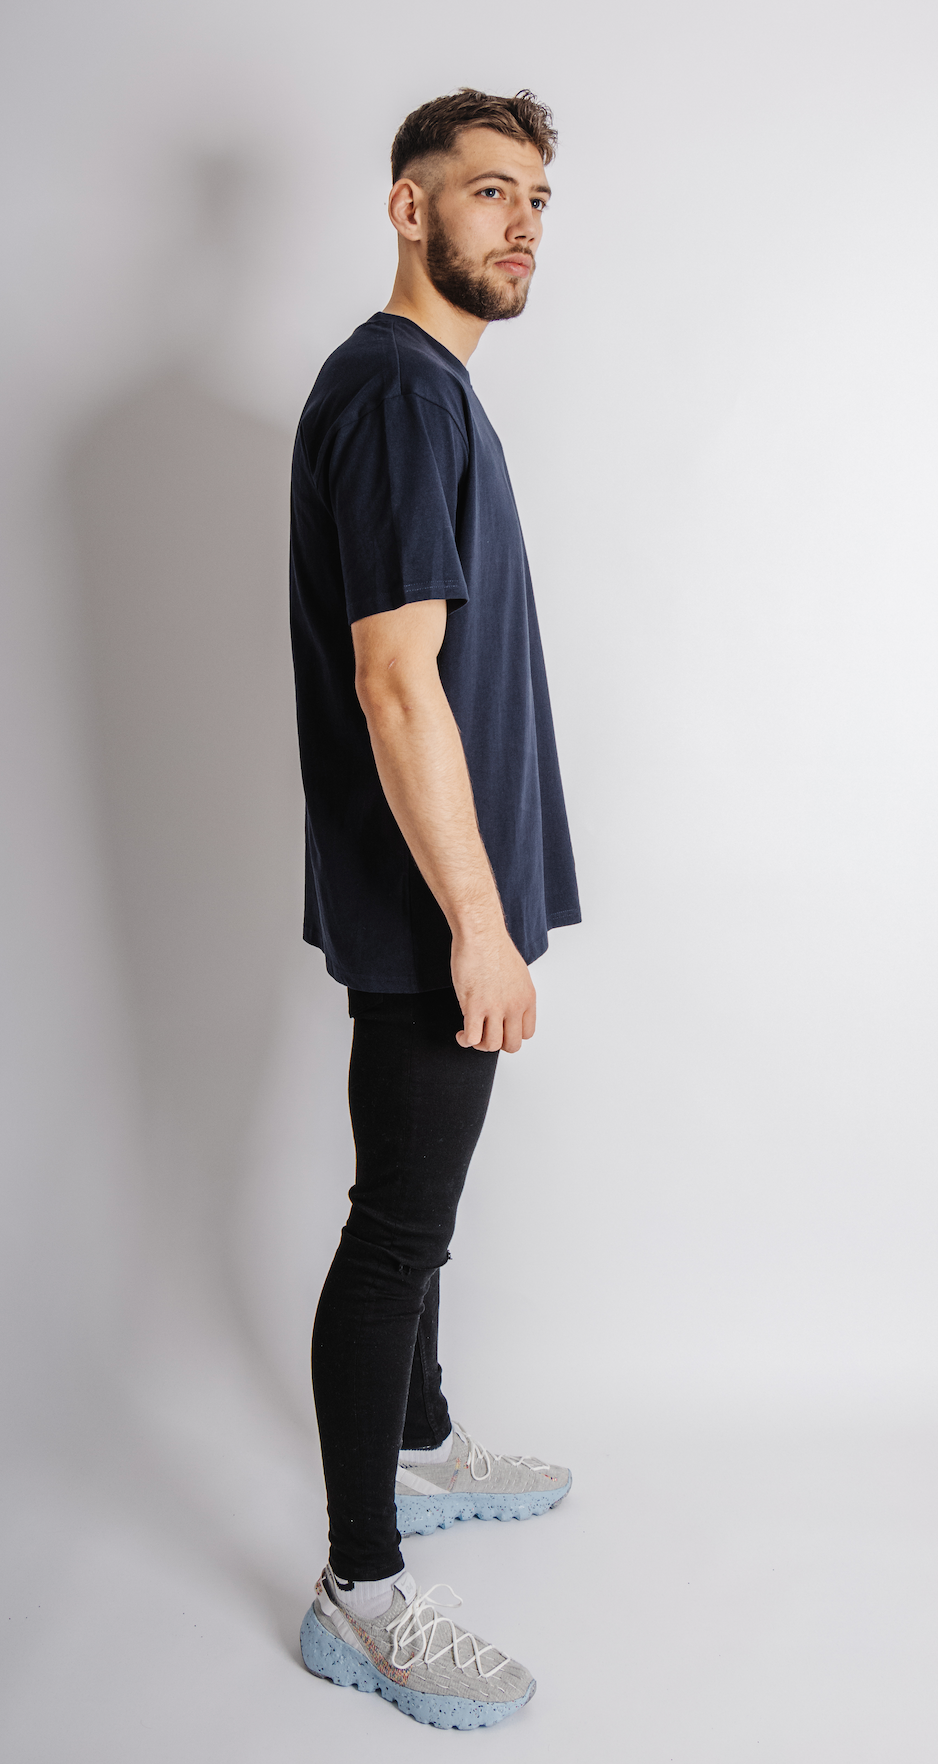 label navy t-shirt - loose fit